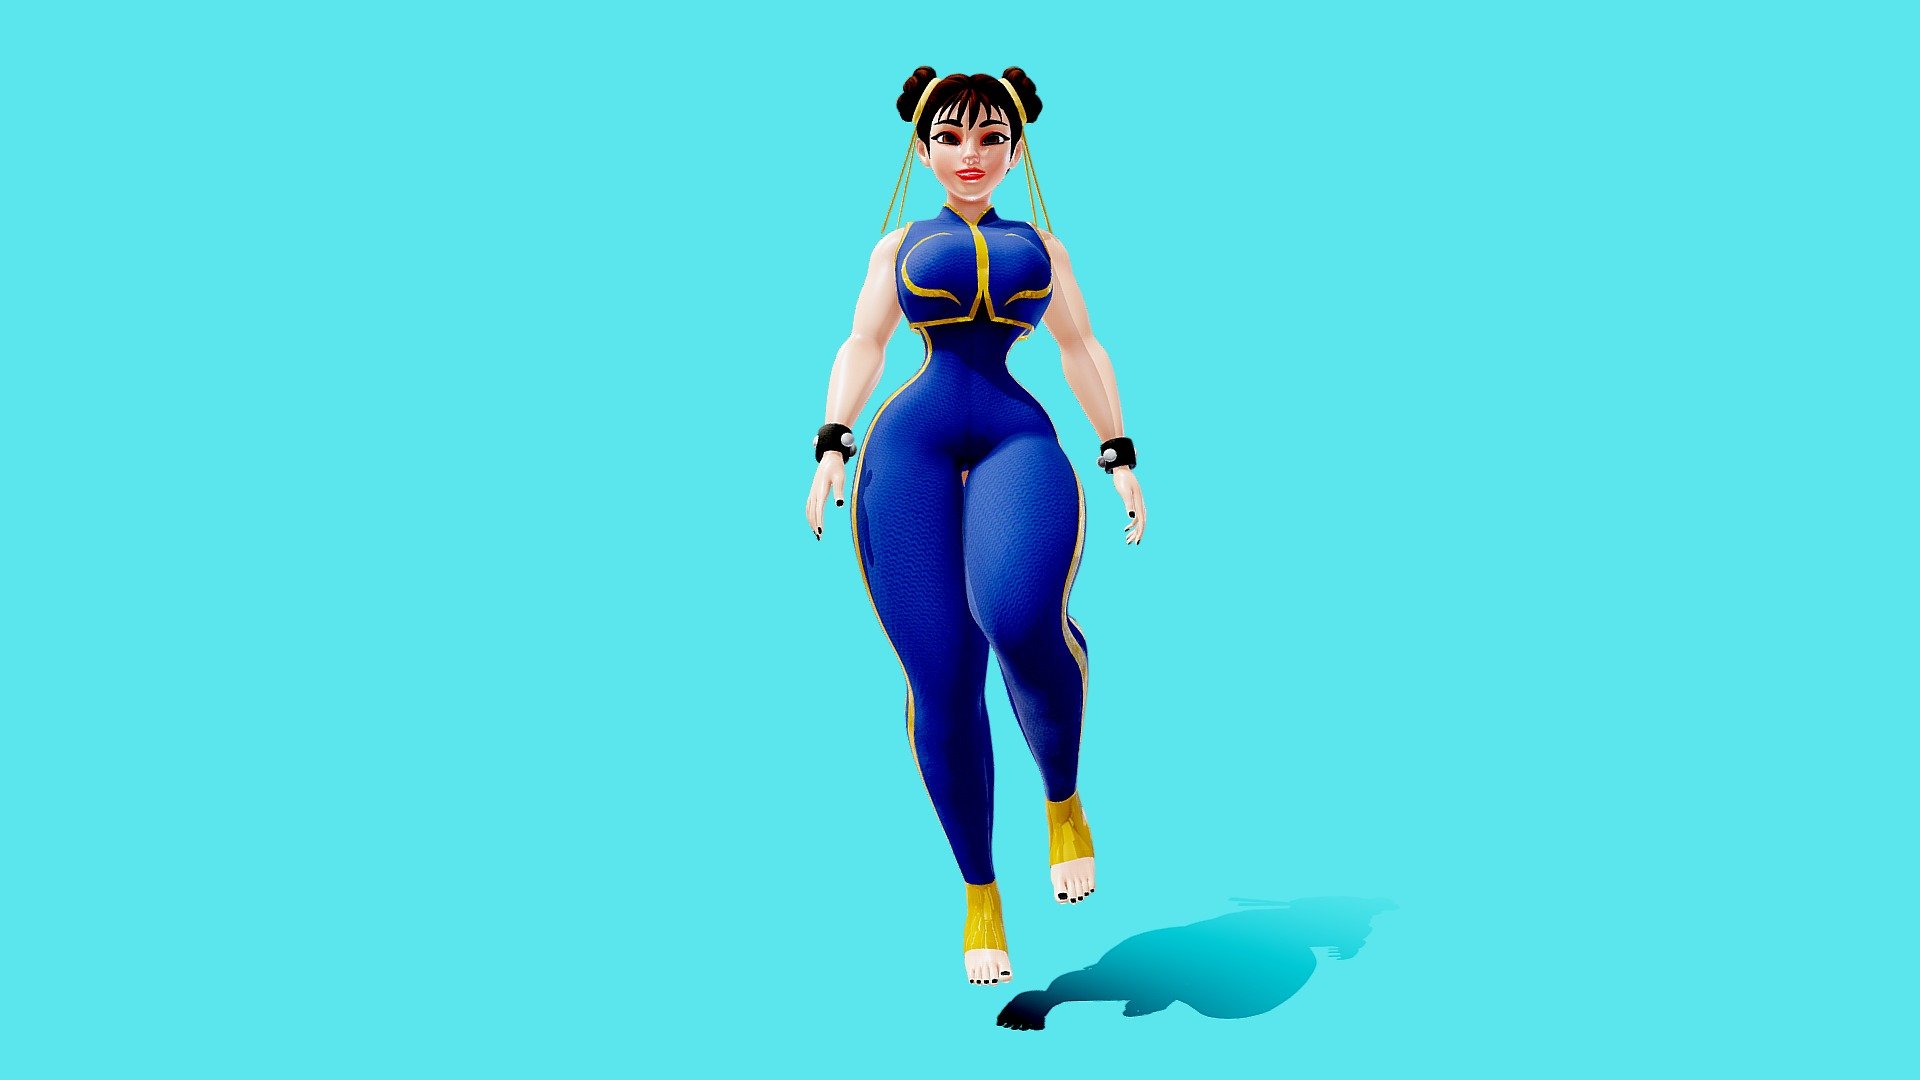 Street Fighter Style Character V2

I wanted to try and model Chun-Li but in my art style like I did Princess Peach. 

Let me know what you think 3d model